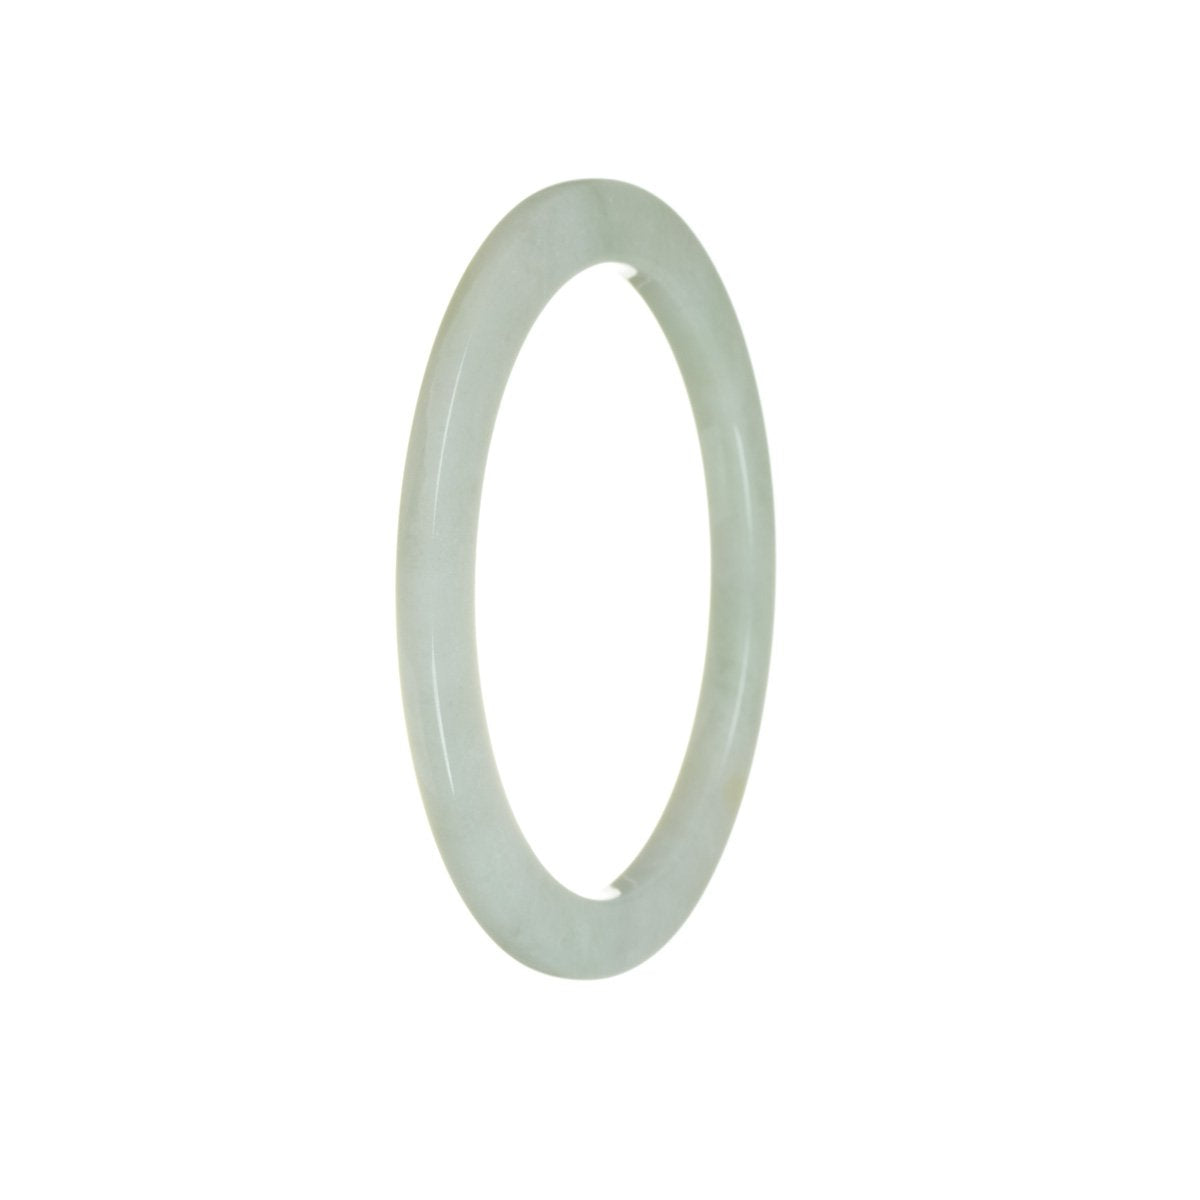 A thin, untreated white and pale green jade bangle bracelet.